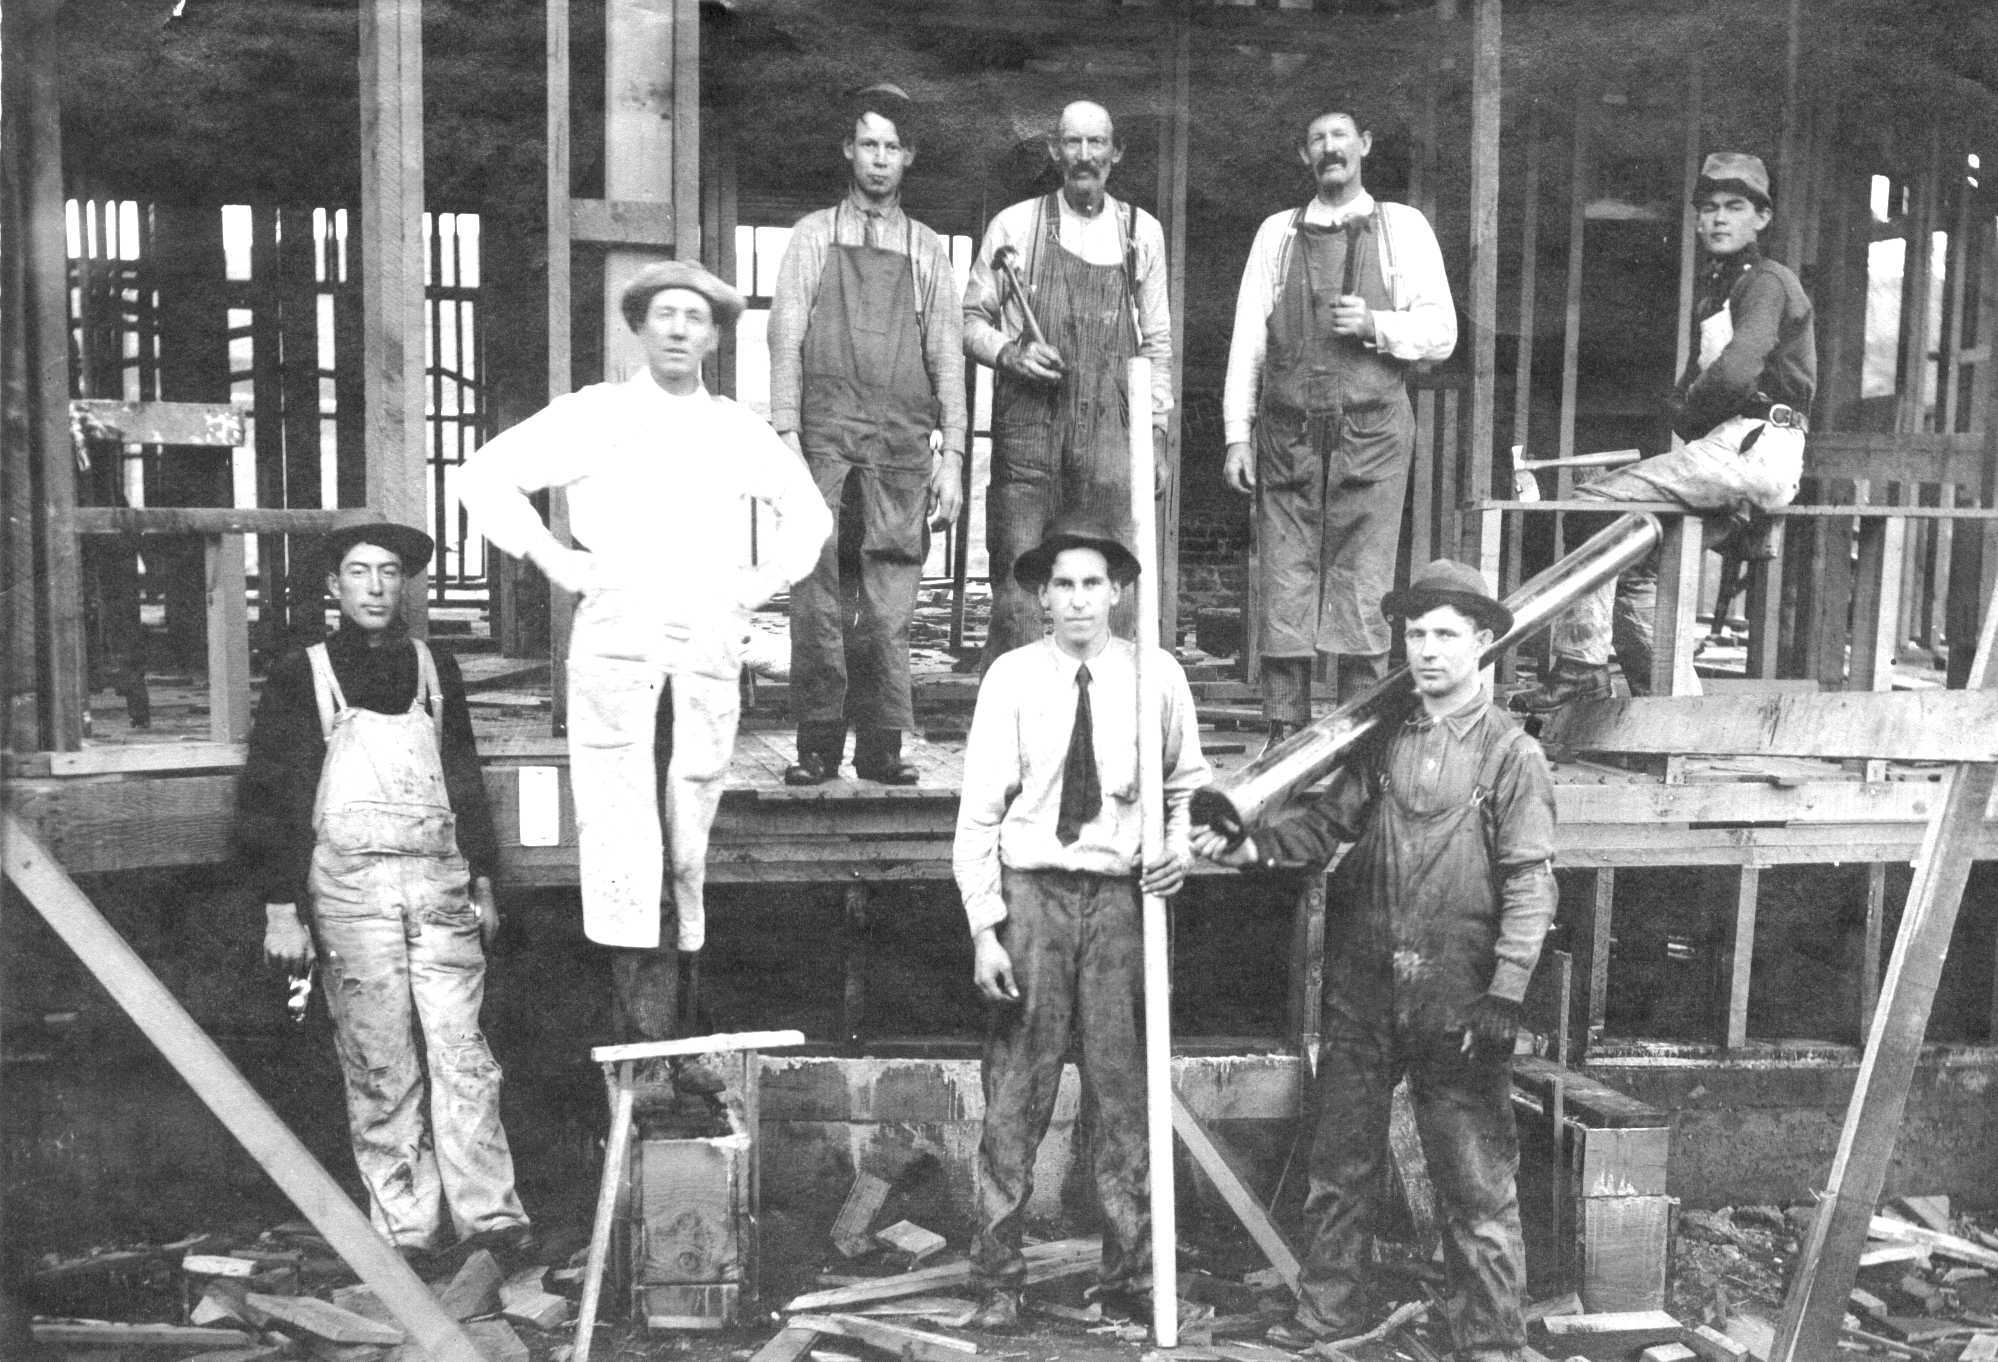 The Bowers Brothers, Tuppers, and others building a house in Wisconsin, circa 1906. Notice the ties.